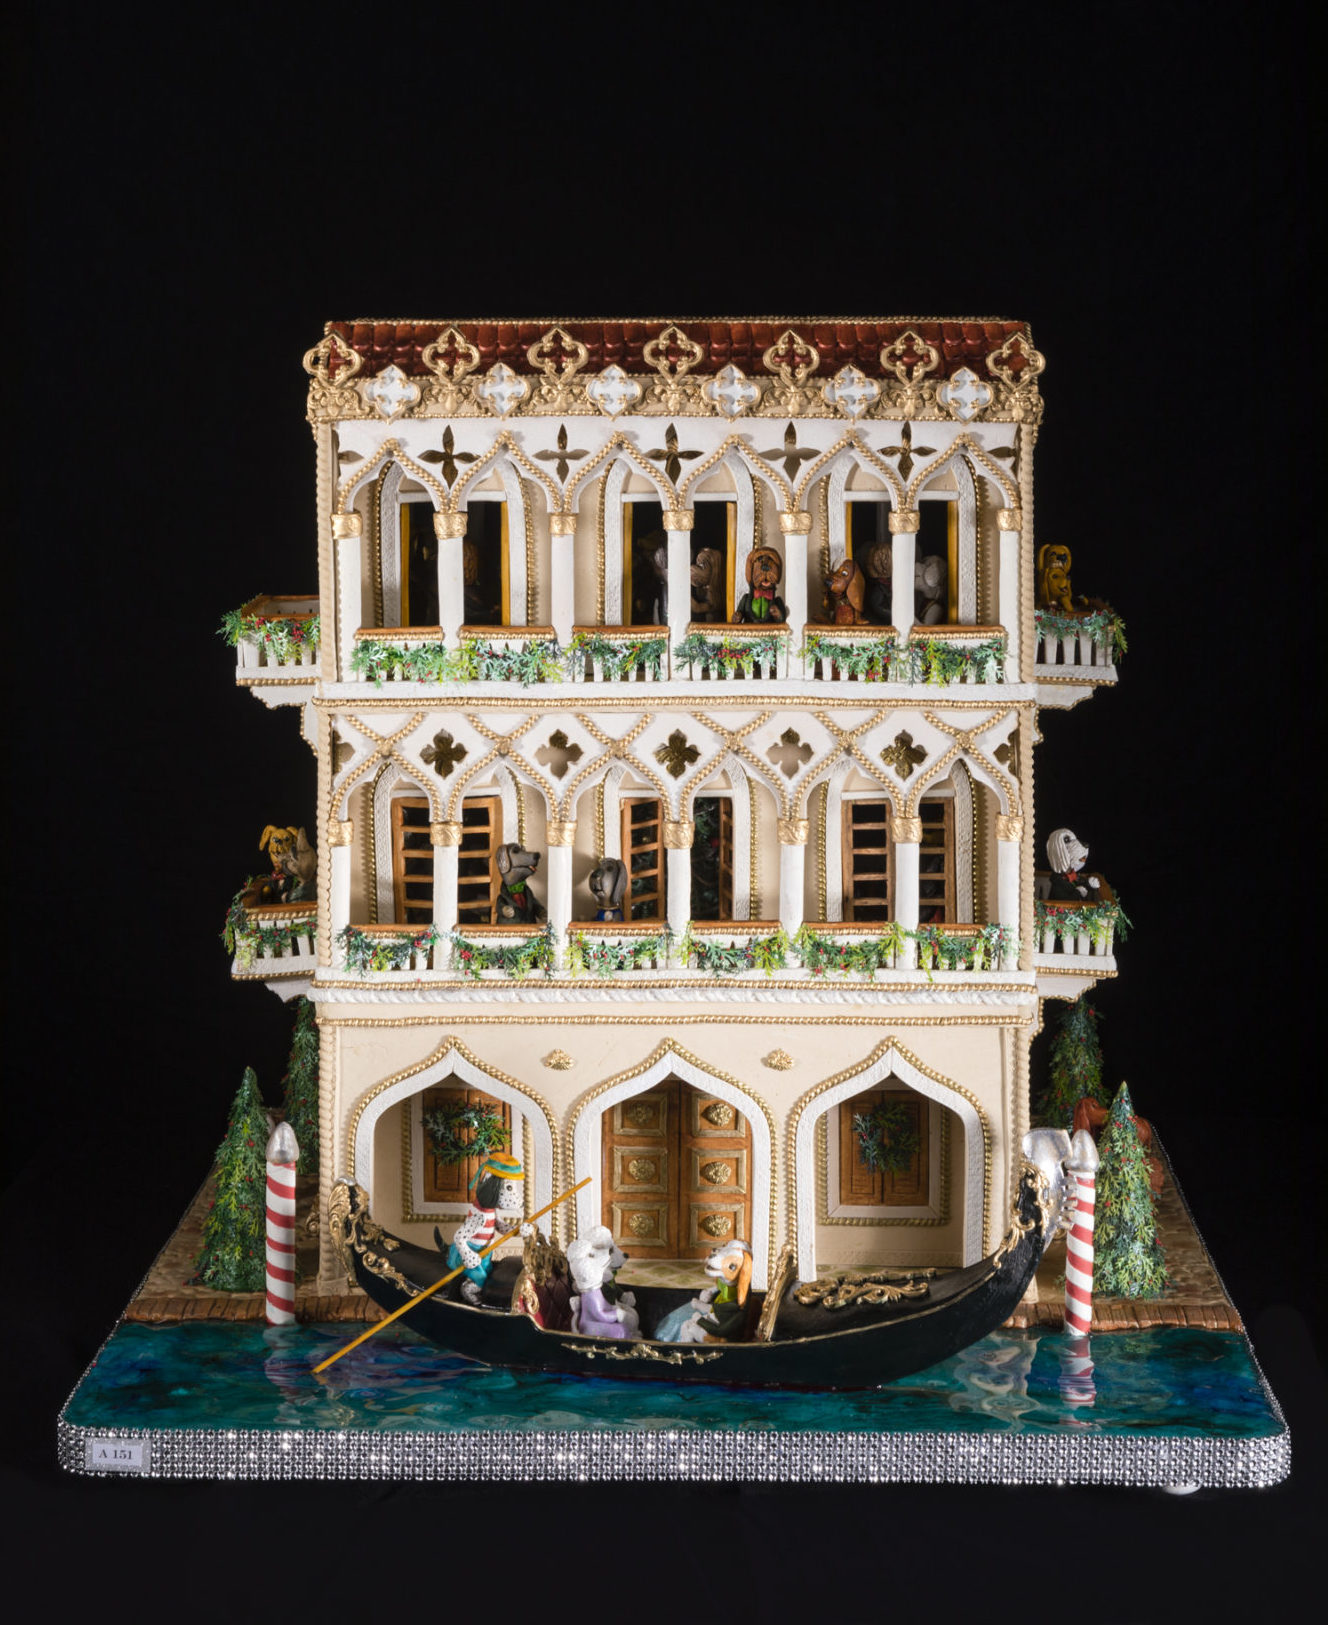 multi-level ornate gingerbread house designed in an Indian architectural style